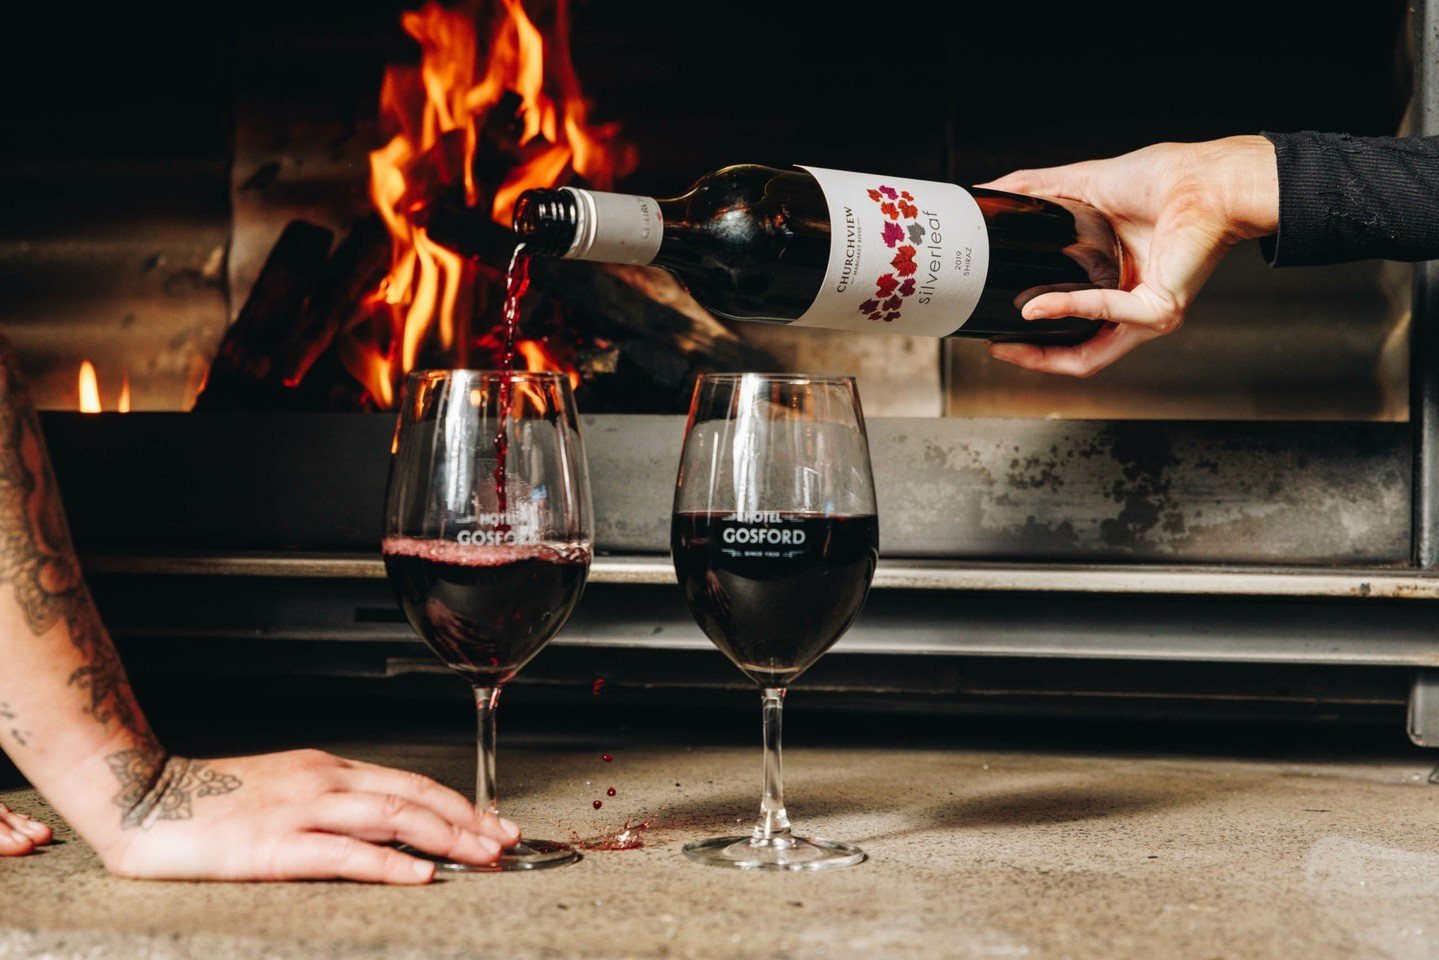 Drop in for dinner tonight and enjoy a cosy wine by the fire &ndash; we have a wide variety of locally sourced and hand-picked labels available. 

After dinner, get fired up for Tuesday Trivia from 7pm! Book your table on our website.

#HotelGosford 